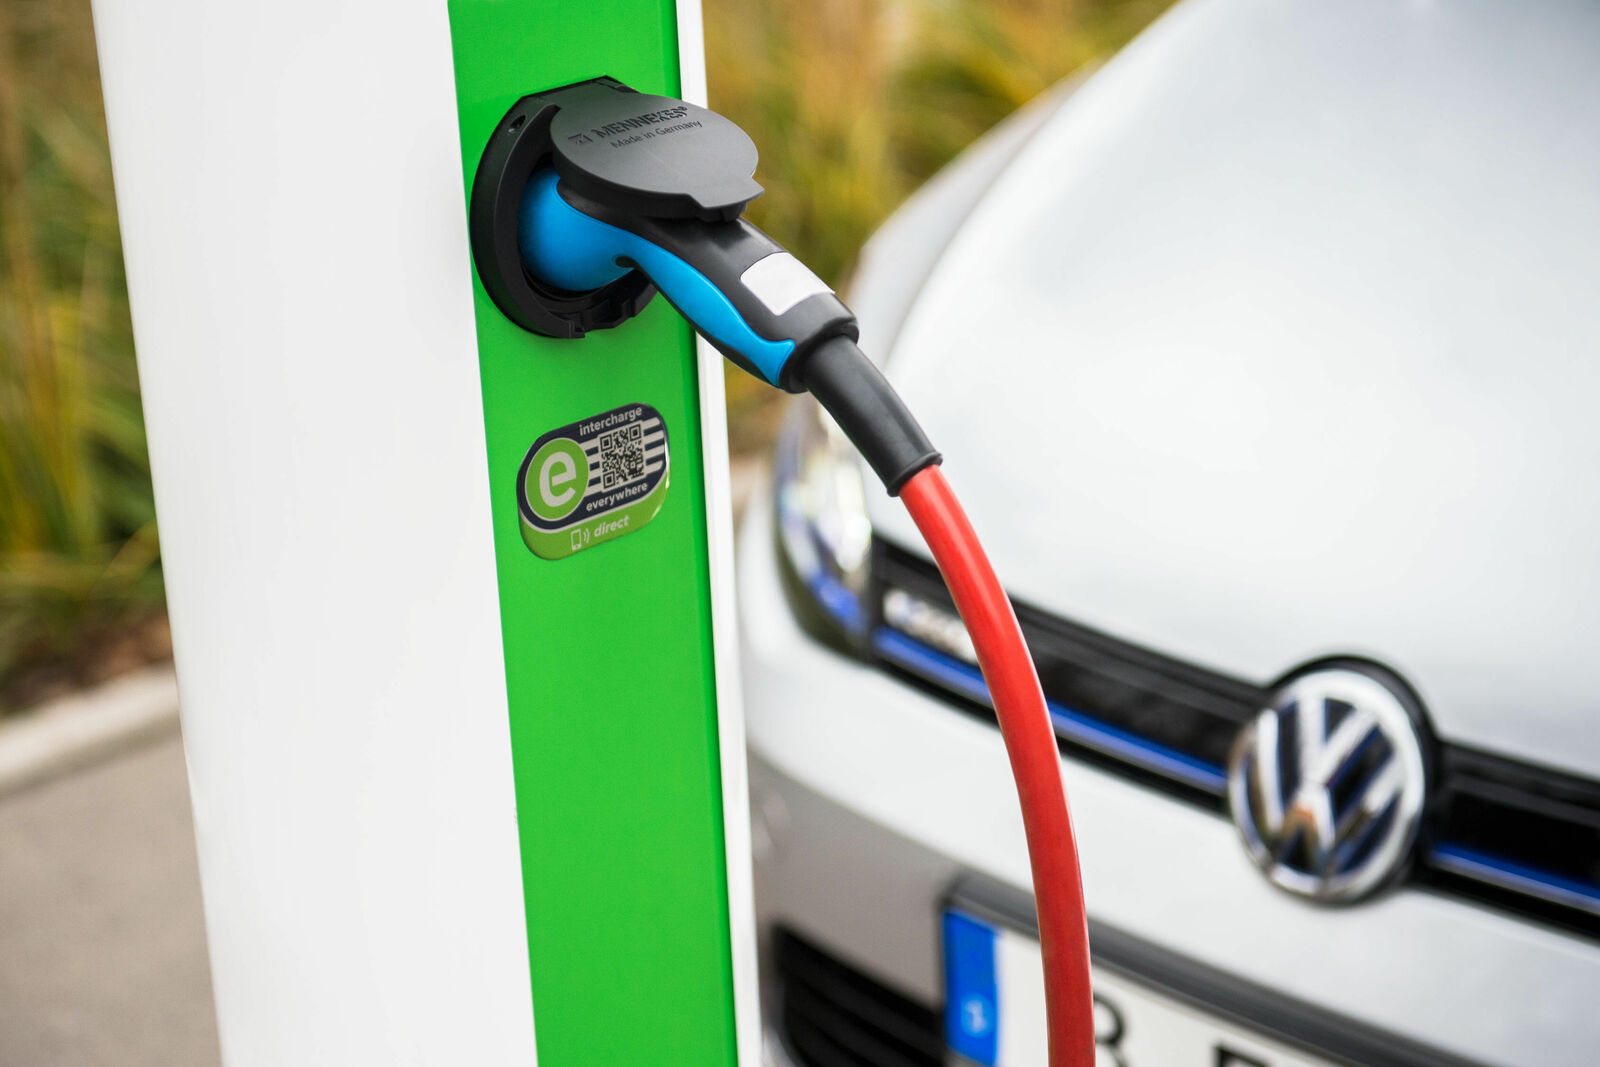 Volkswagen Group invests in Hubject, the leading eRoaming platform for Europe-wide charging of electric vehicles